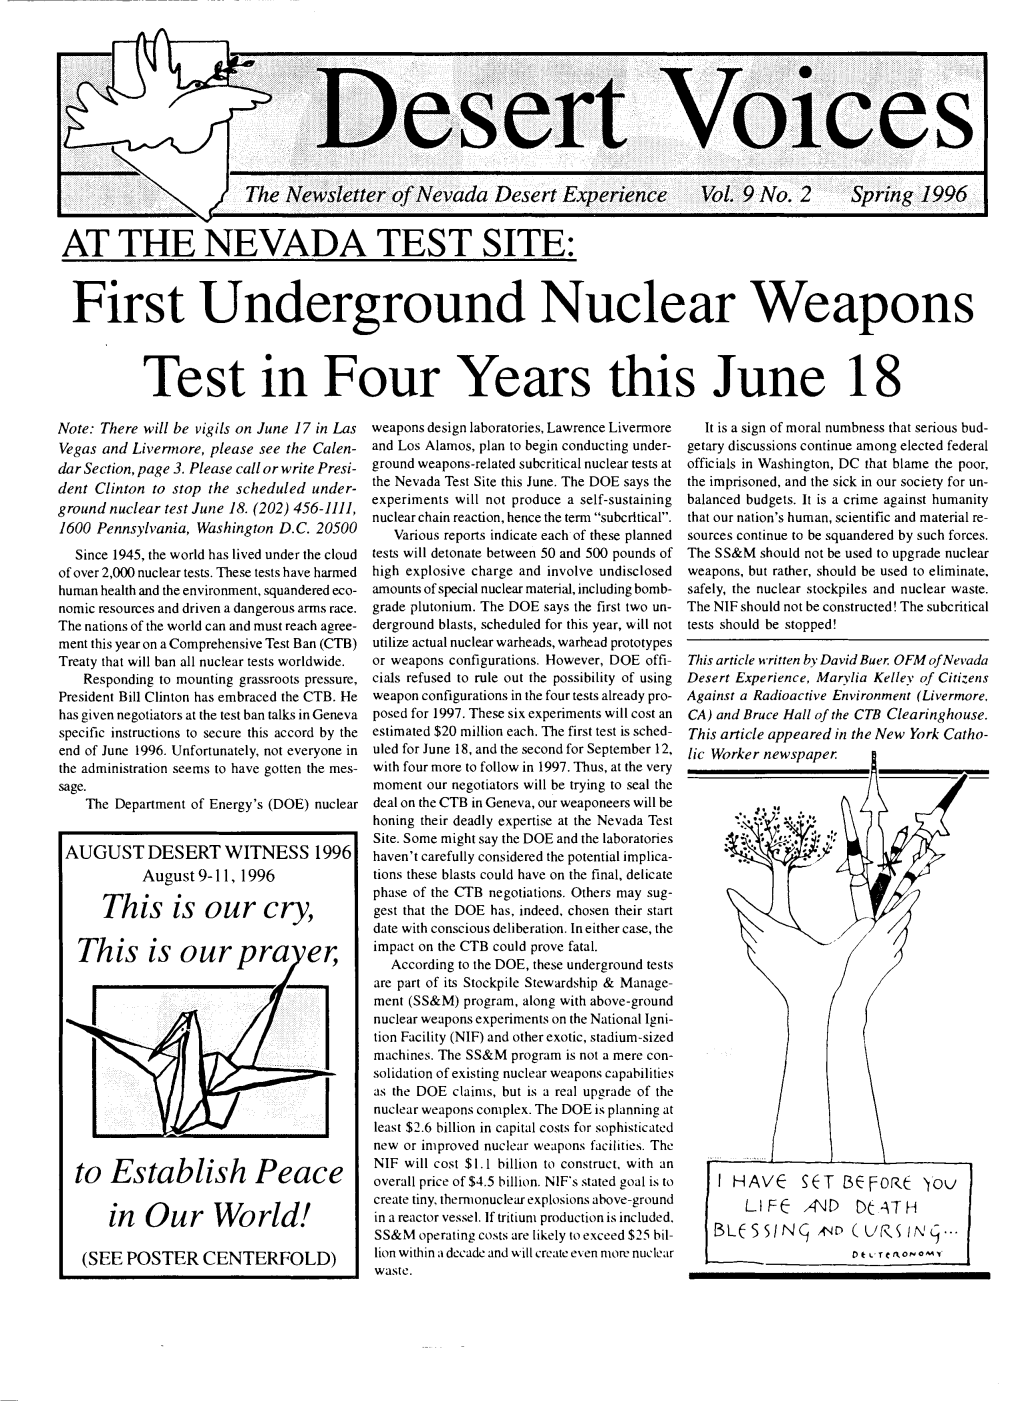 First Underground Nuclear Weapons Test In